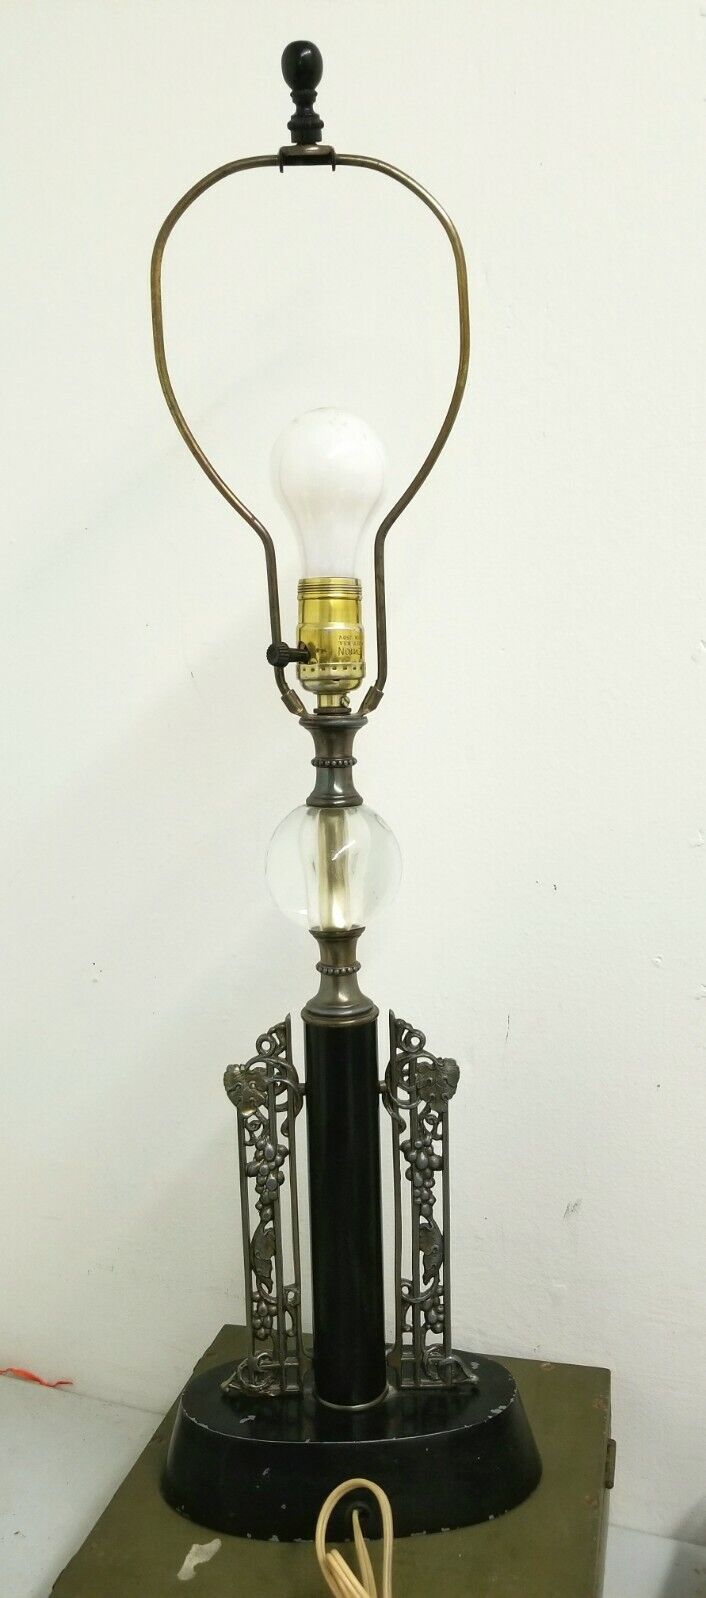 Mutual Sunset Lamp Co. 5195 Table Lamp MSLC Art Deco Style Vintage Designer